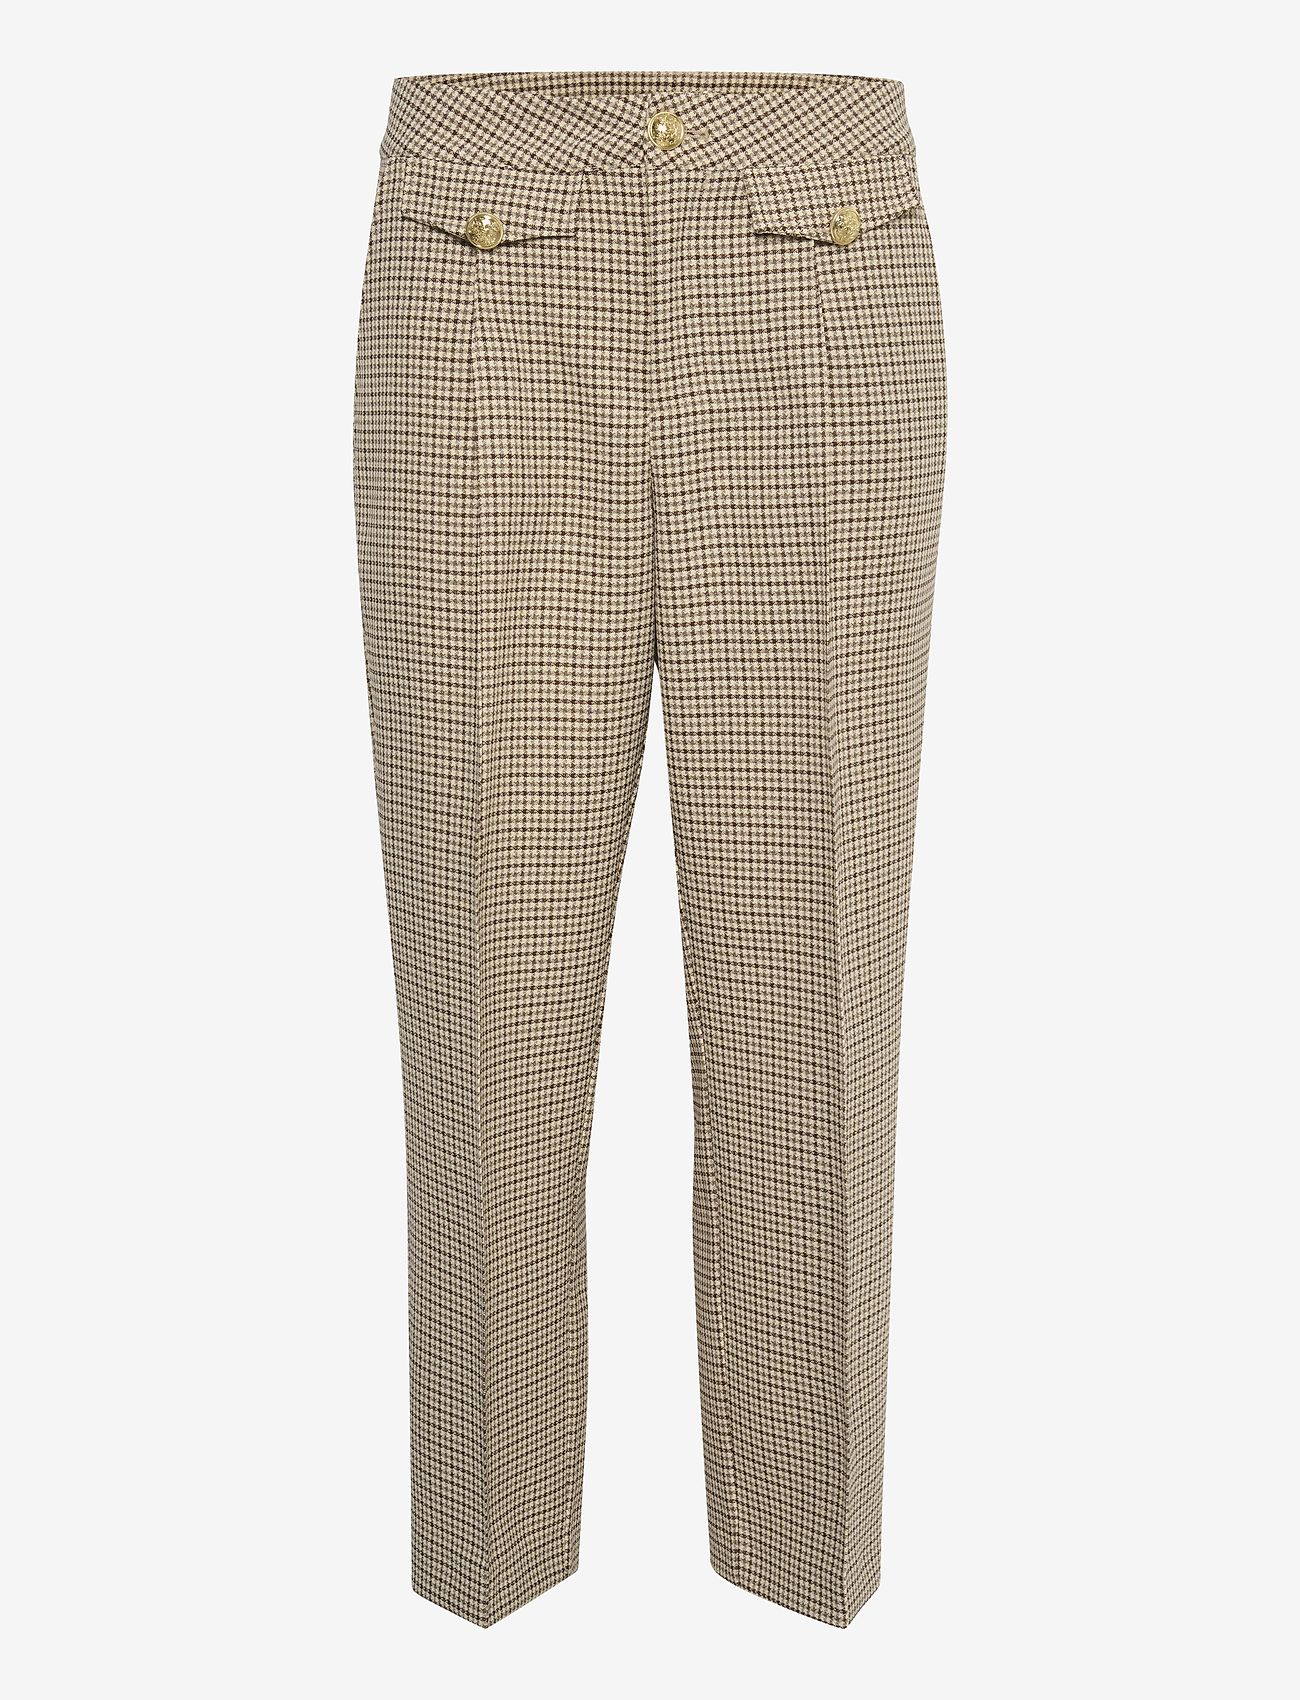 Culture - CUastra Pants - tailored trousers - nomad - 0